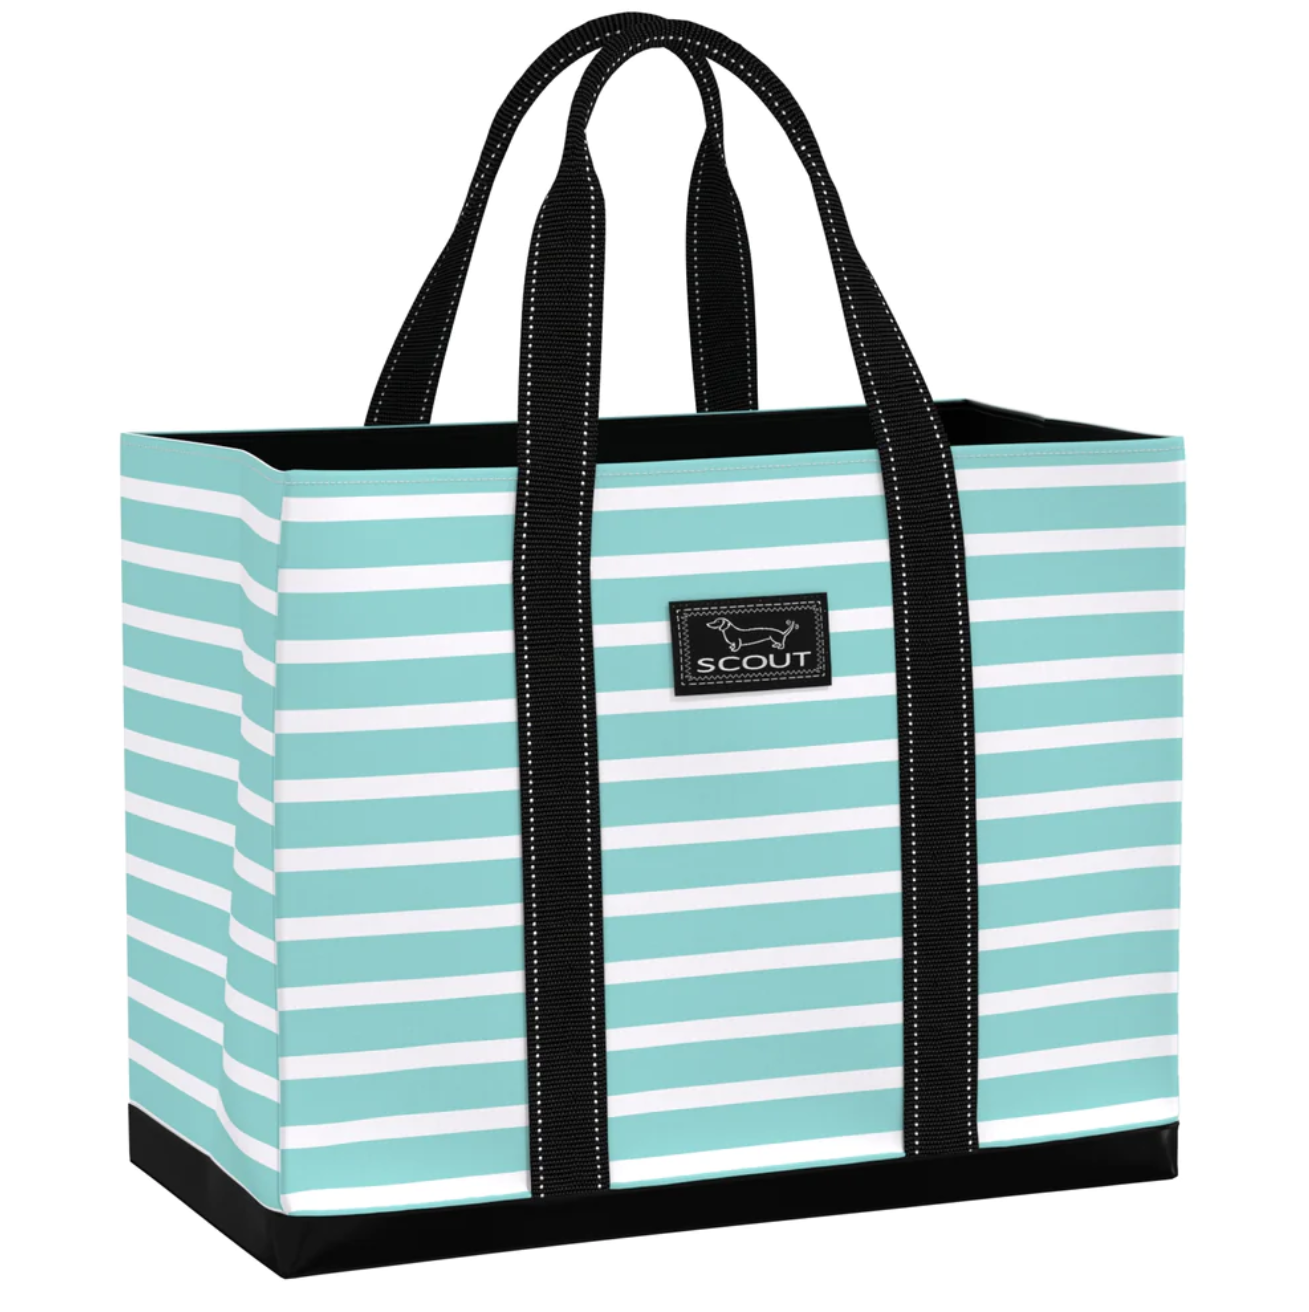 Scout Original Deano Tote Luggage, Totes in Montauk Mint at Wrapsody